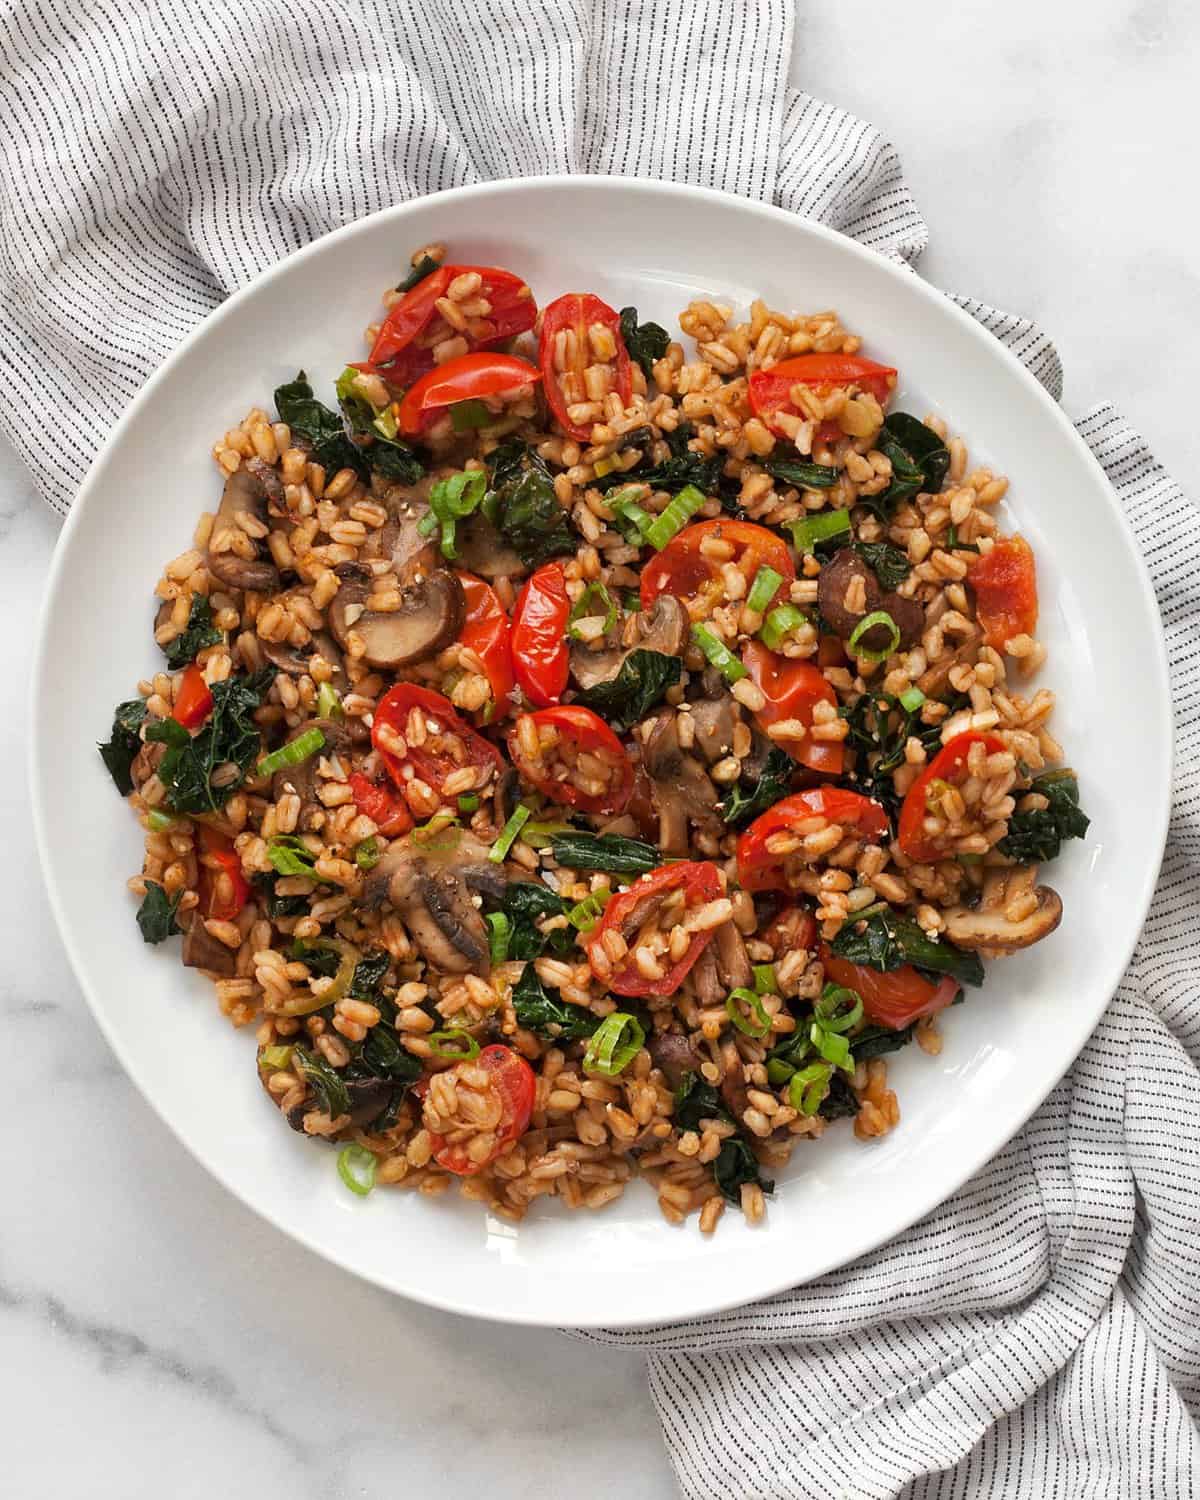 Mushroom farro with tomatoes and kale on a plate.